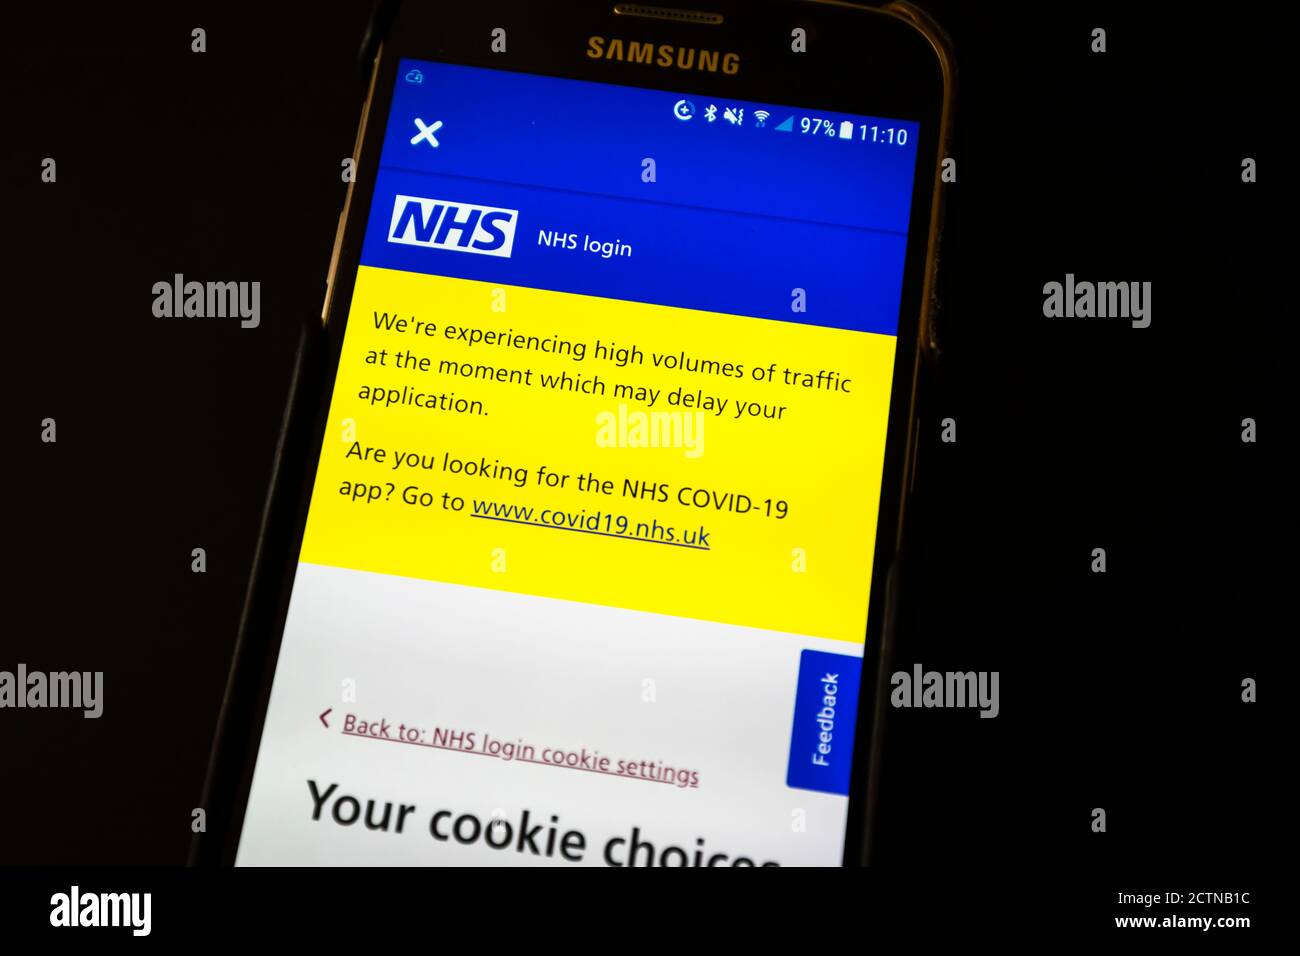 The Nhs Track And Trace App On The Screen Of An Android Mobile Phone With A Message That High Volumes Of Traffic May Delay Your Application Stock Photo Alamy